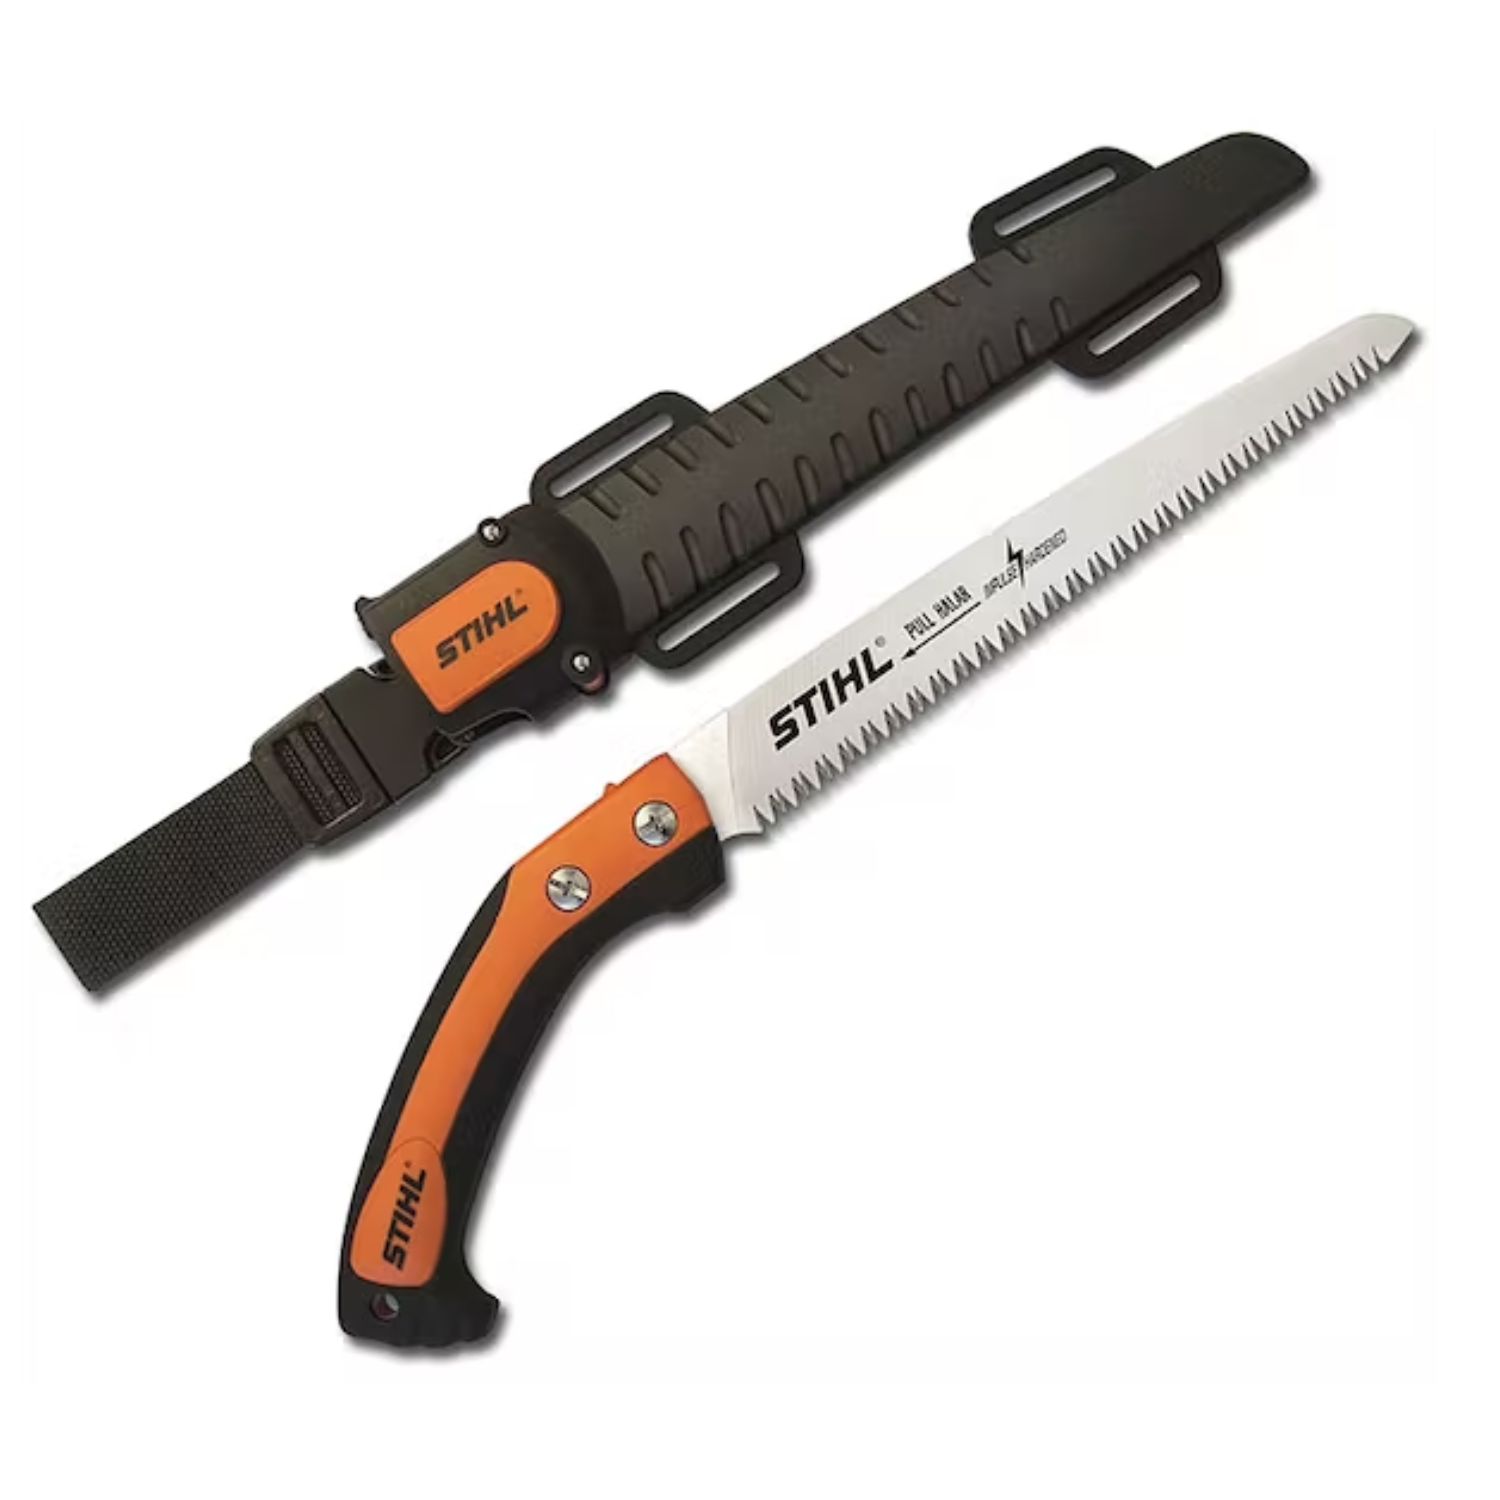 Stihl PS 60 Fixed Blade Pruning Saw | 7010 882 0901